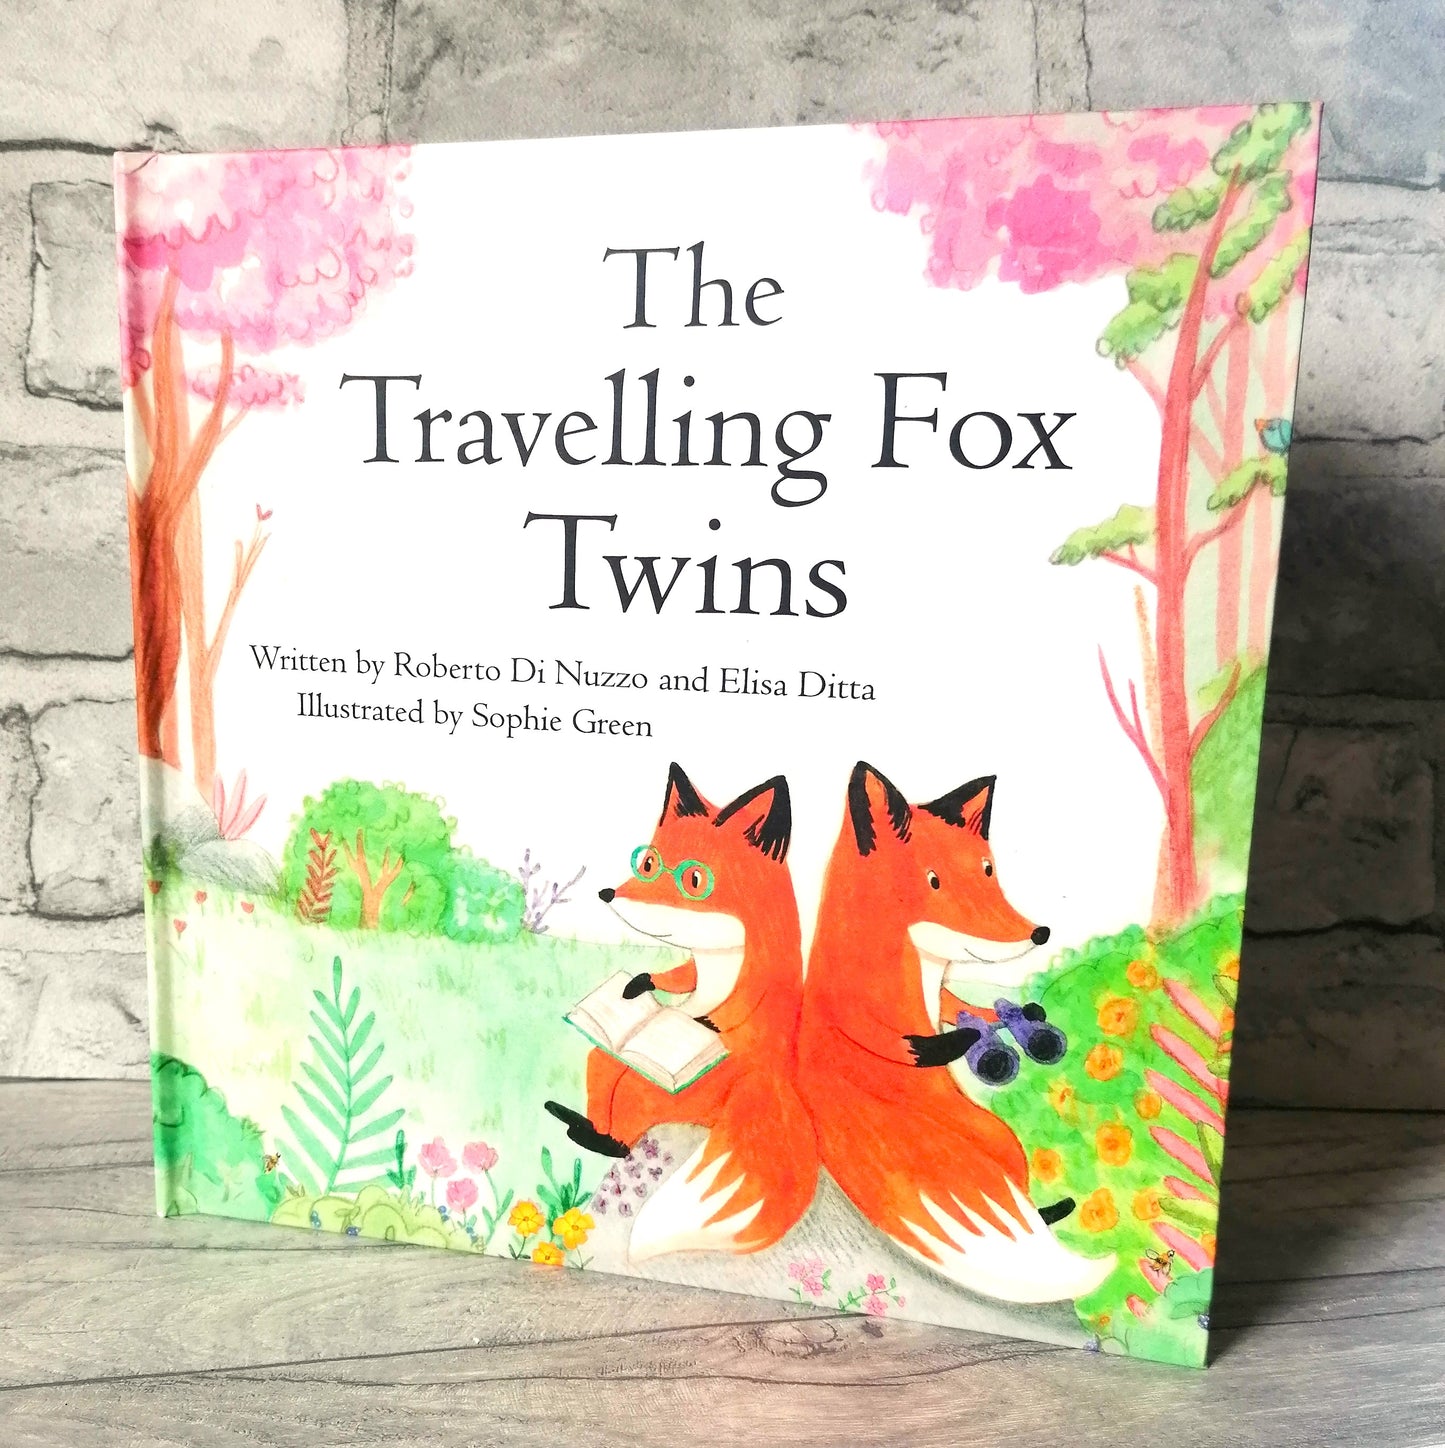 The Travelling Fox Twins